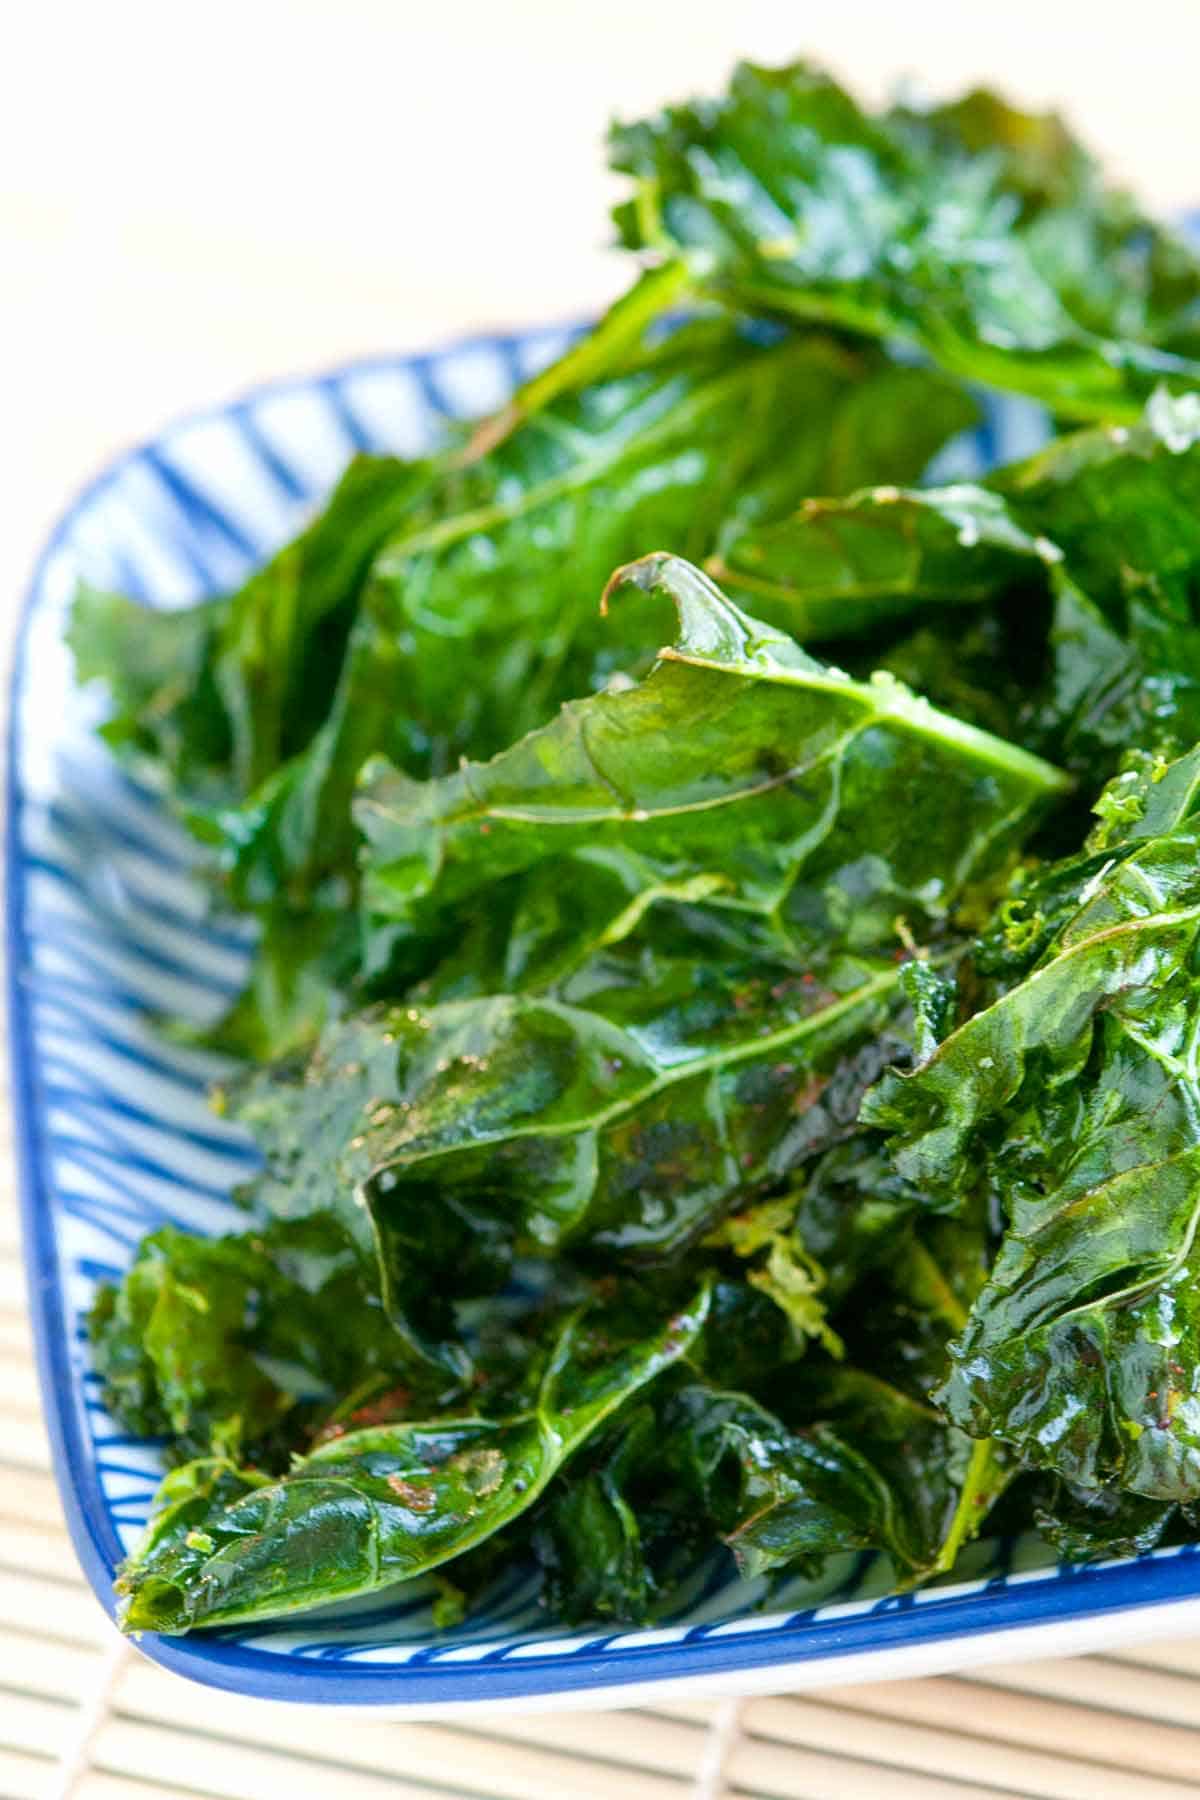 Chili Lime Kale Chips Recipe